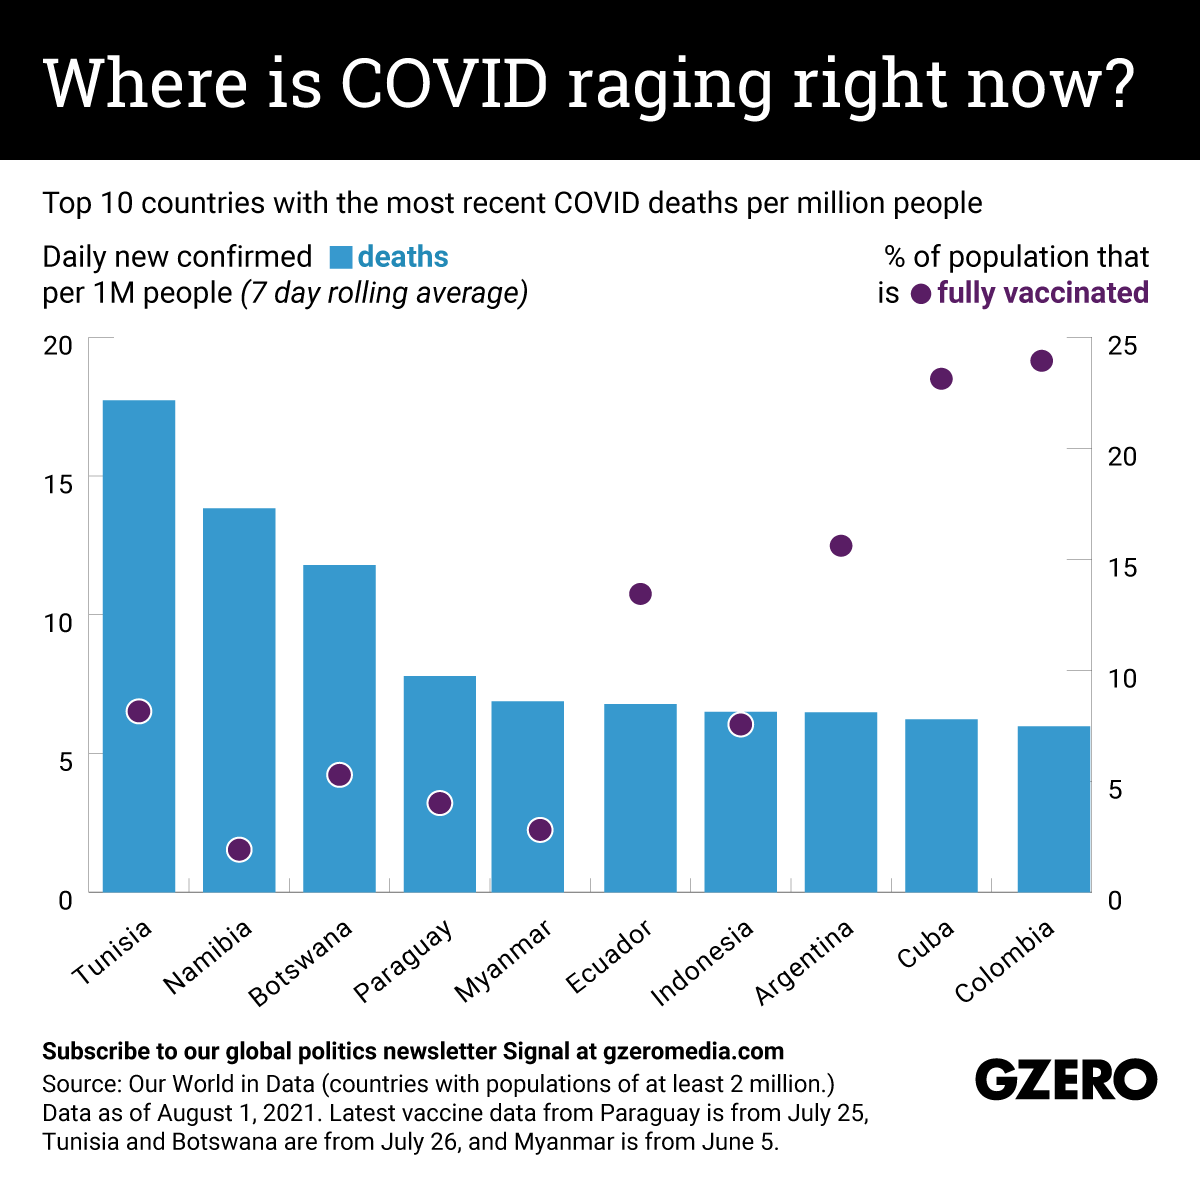 Top 10 countries with the most recent COVID deaths per million people